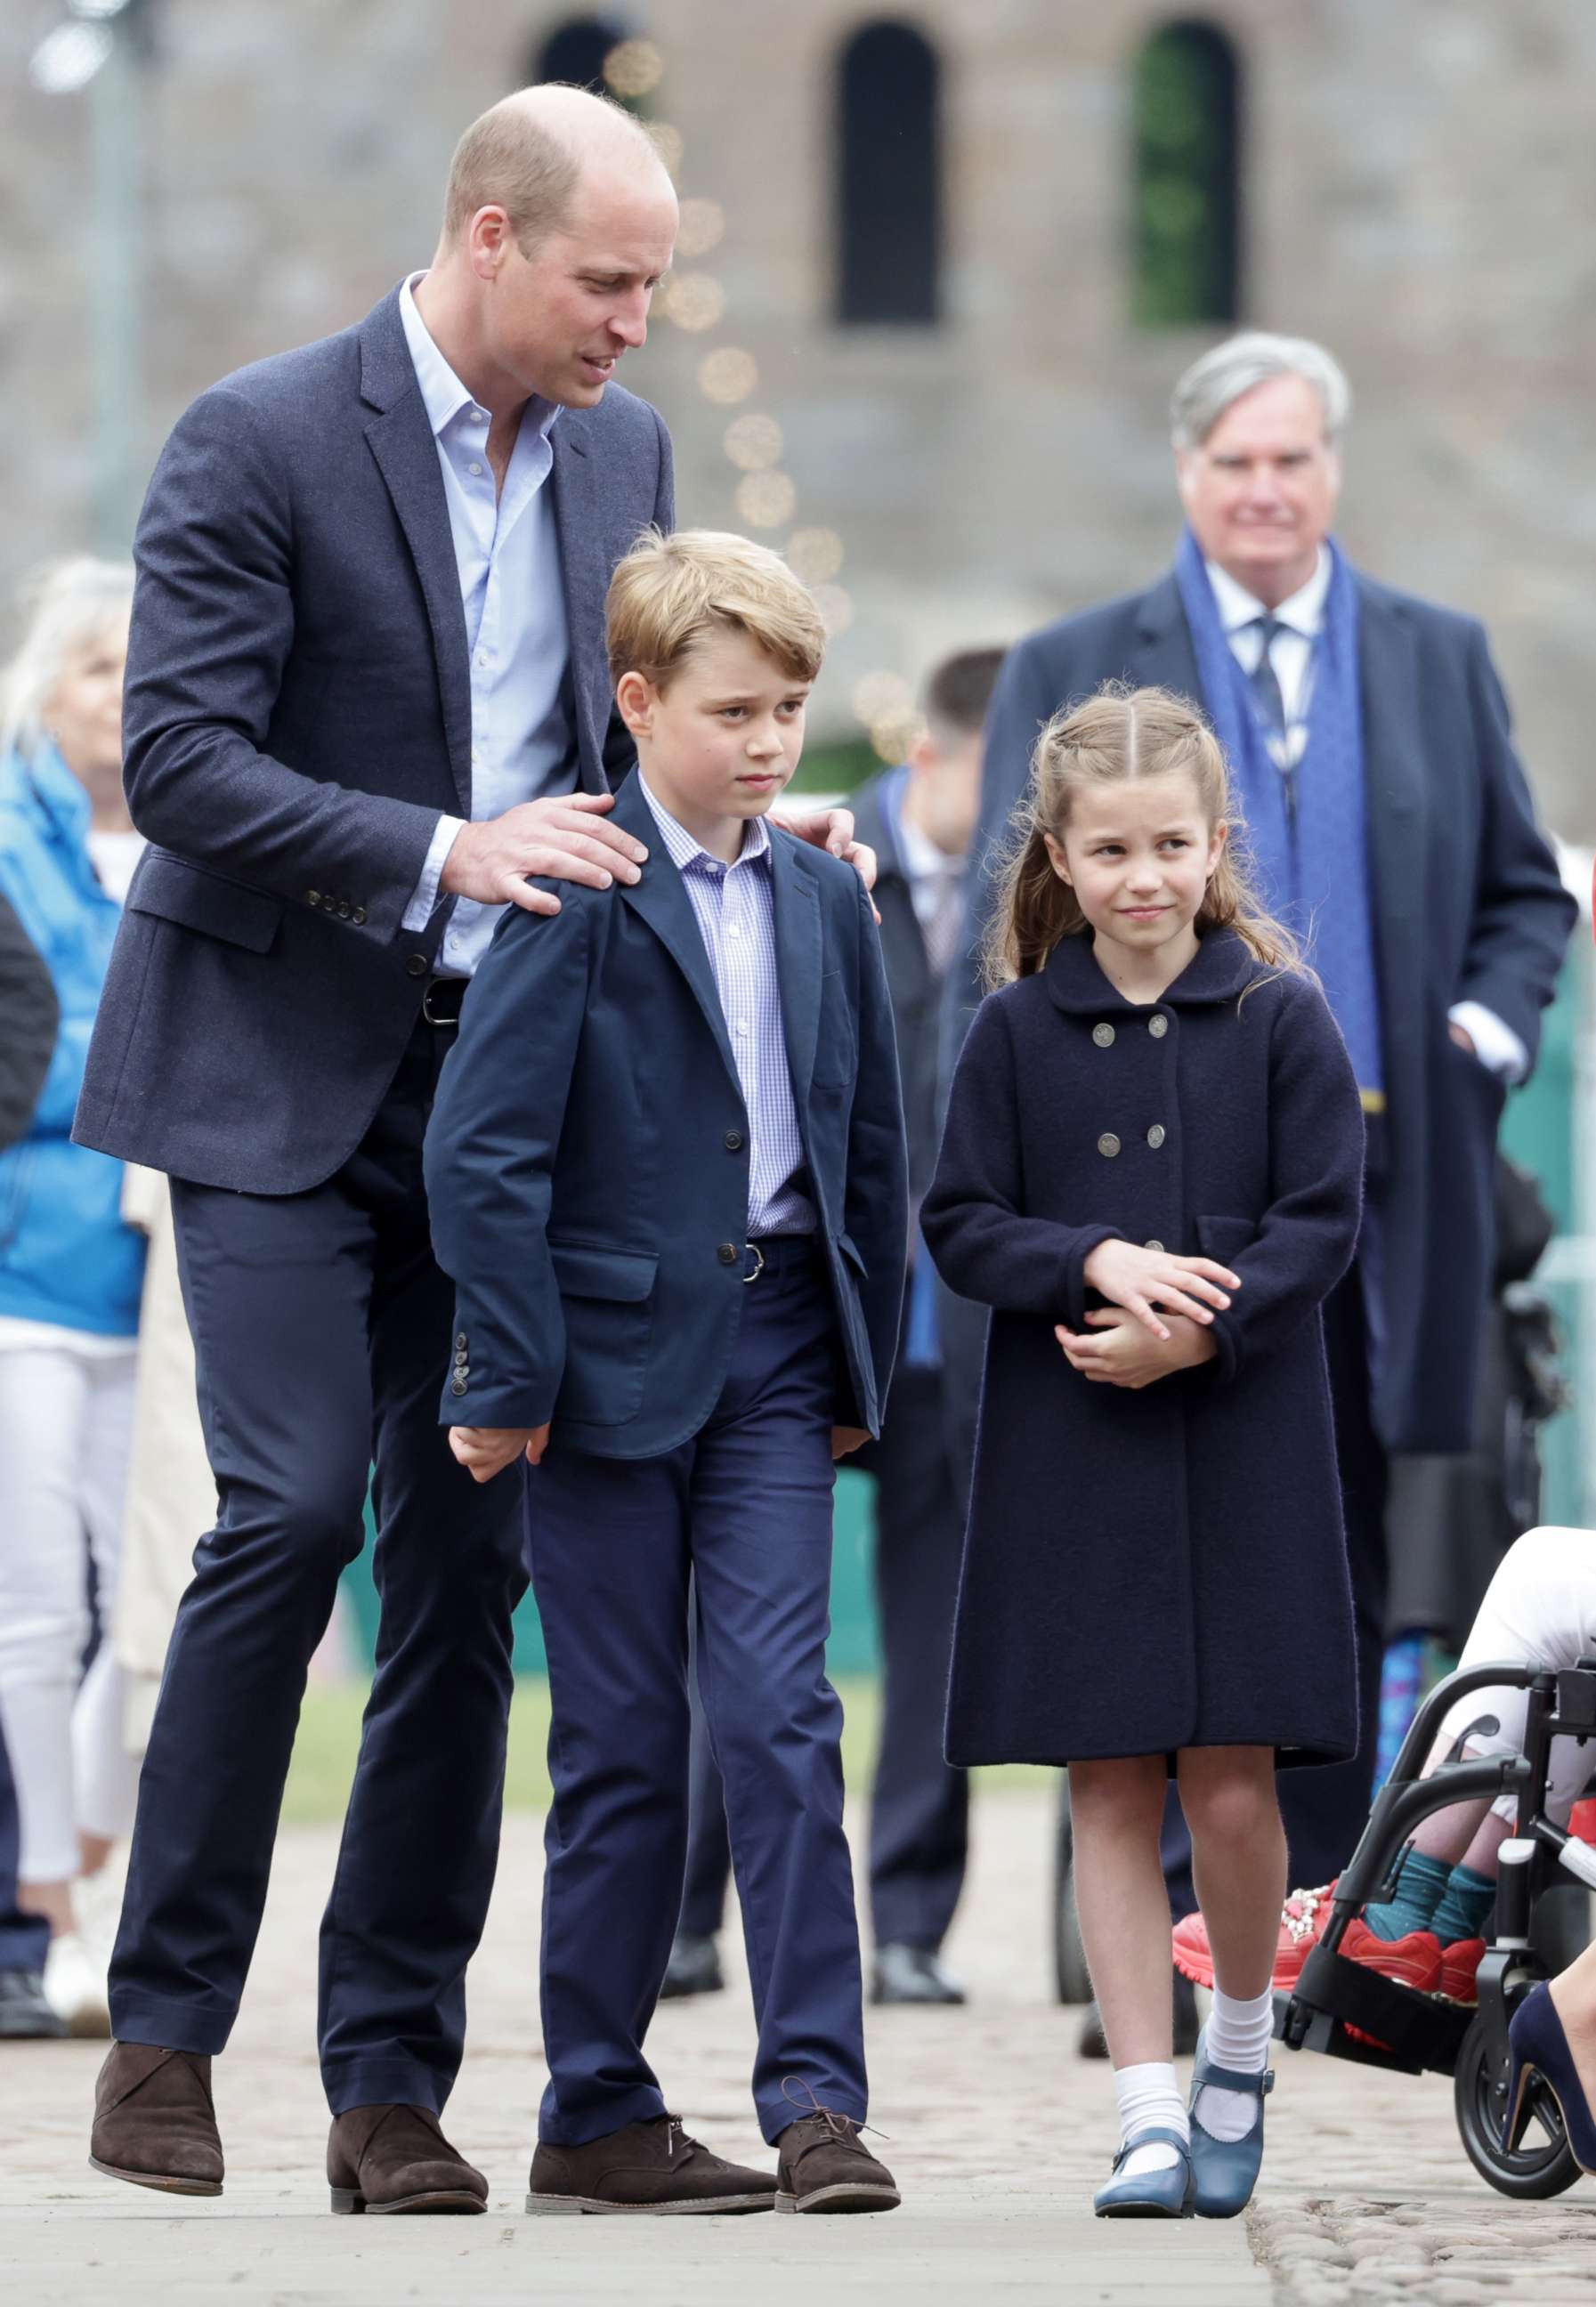 PHOTO: Prince William, Duke of Cambridge with Prince George of Cambridge and Princess Charlotte of Cambridge during a visit to Cardiff Castle, June 4, 2022, in Cardiff, Wales.